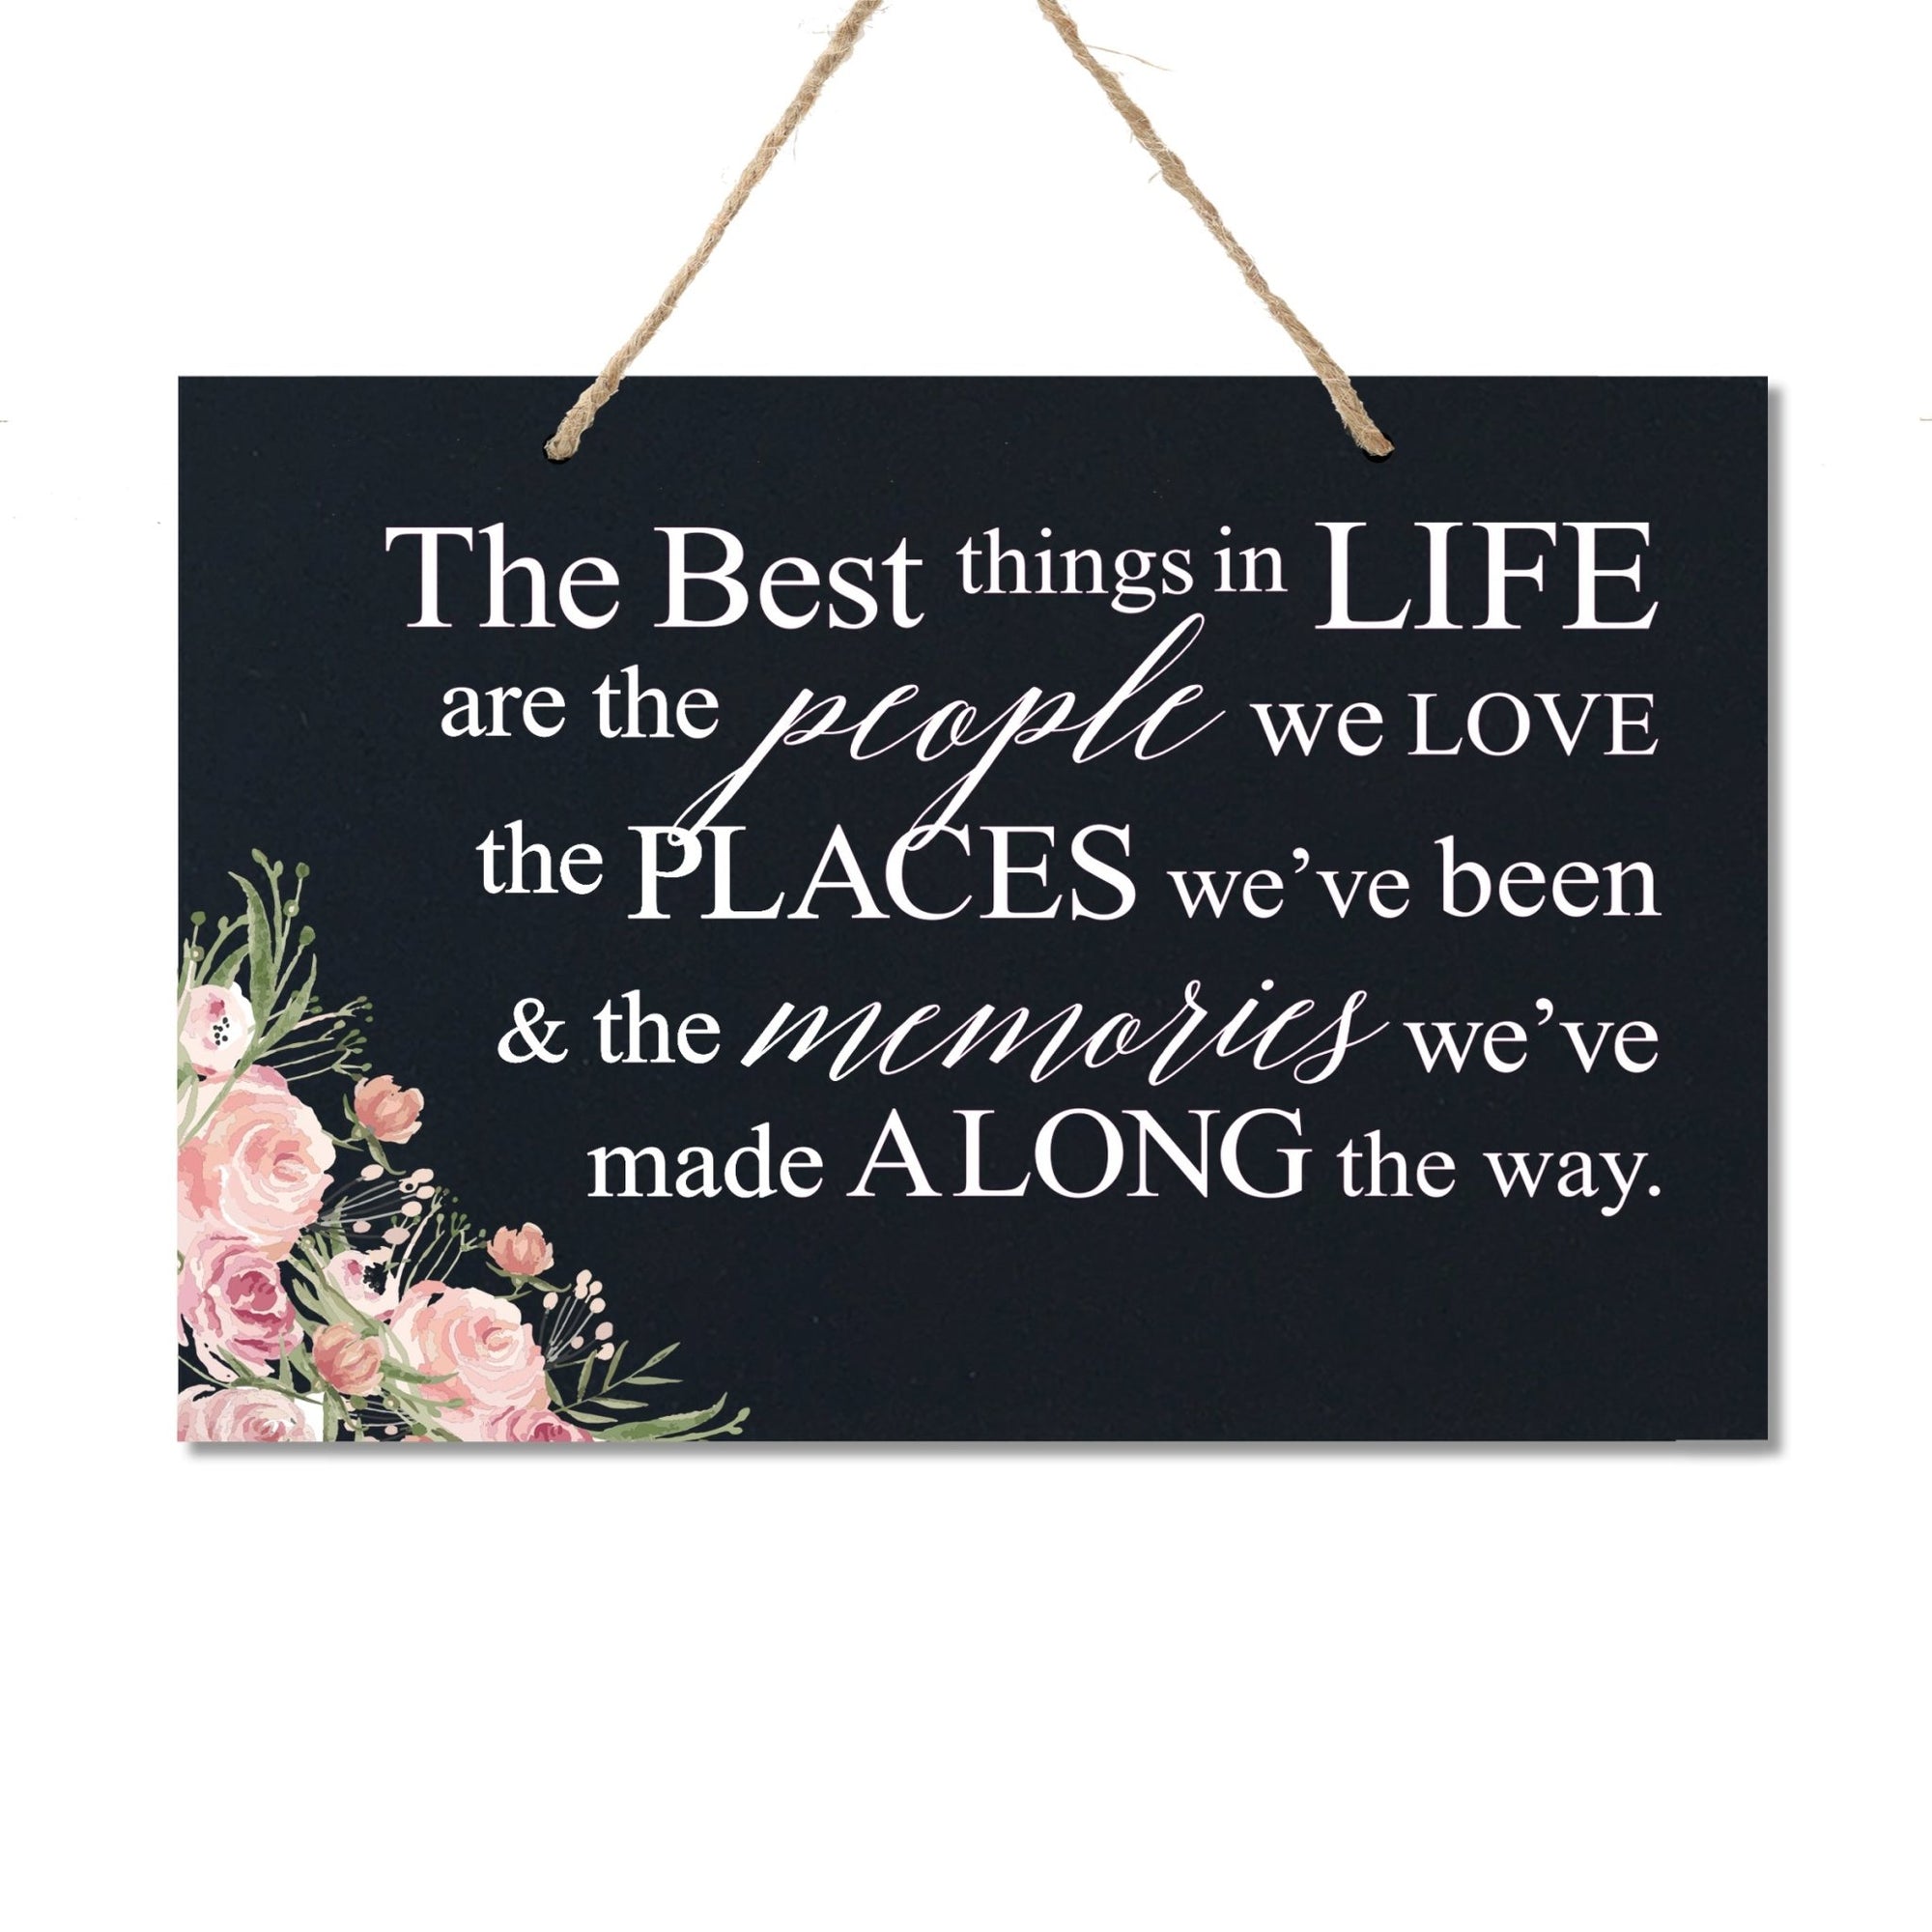 Housewarming Wall Hanging Sign Gift - The Best Things - LifeSong Milestones